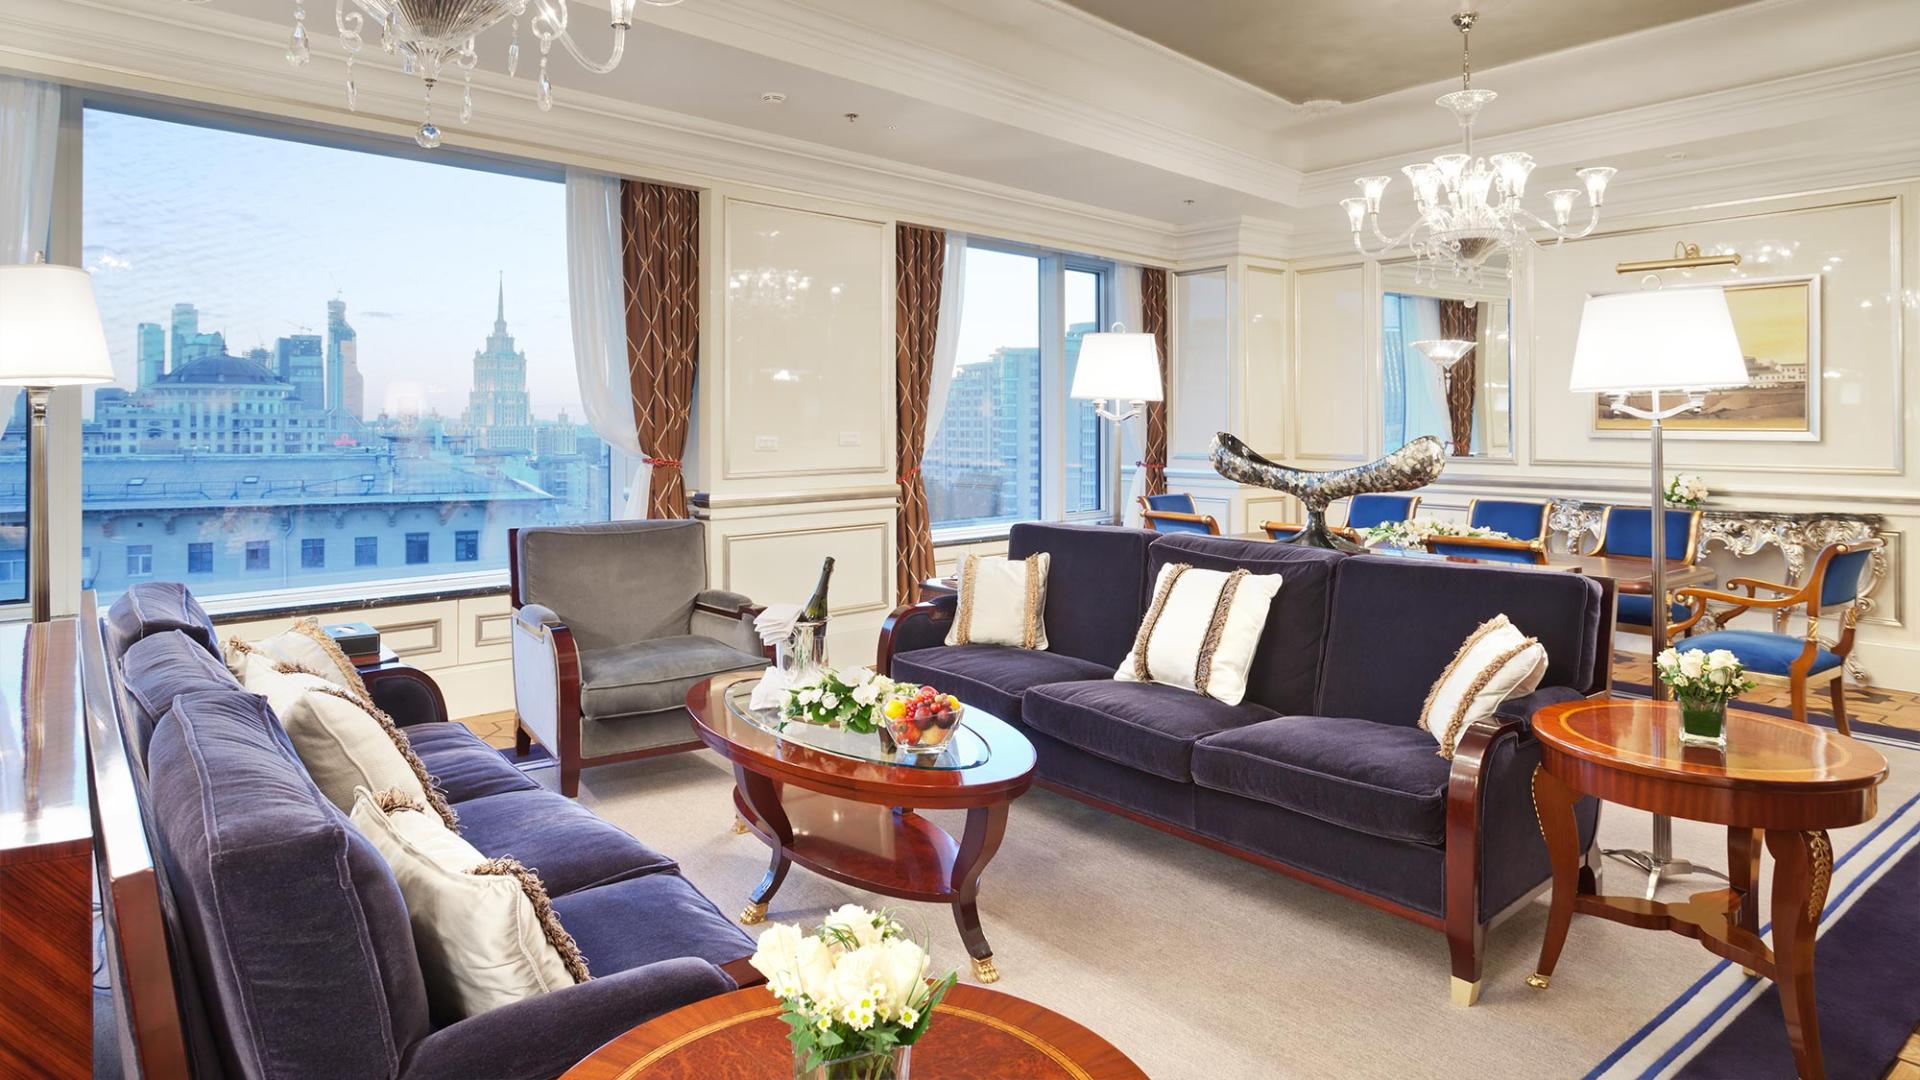 Lotte Hotel Moscow-Rooms-Standard-Presidential Suite Room